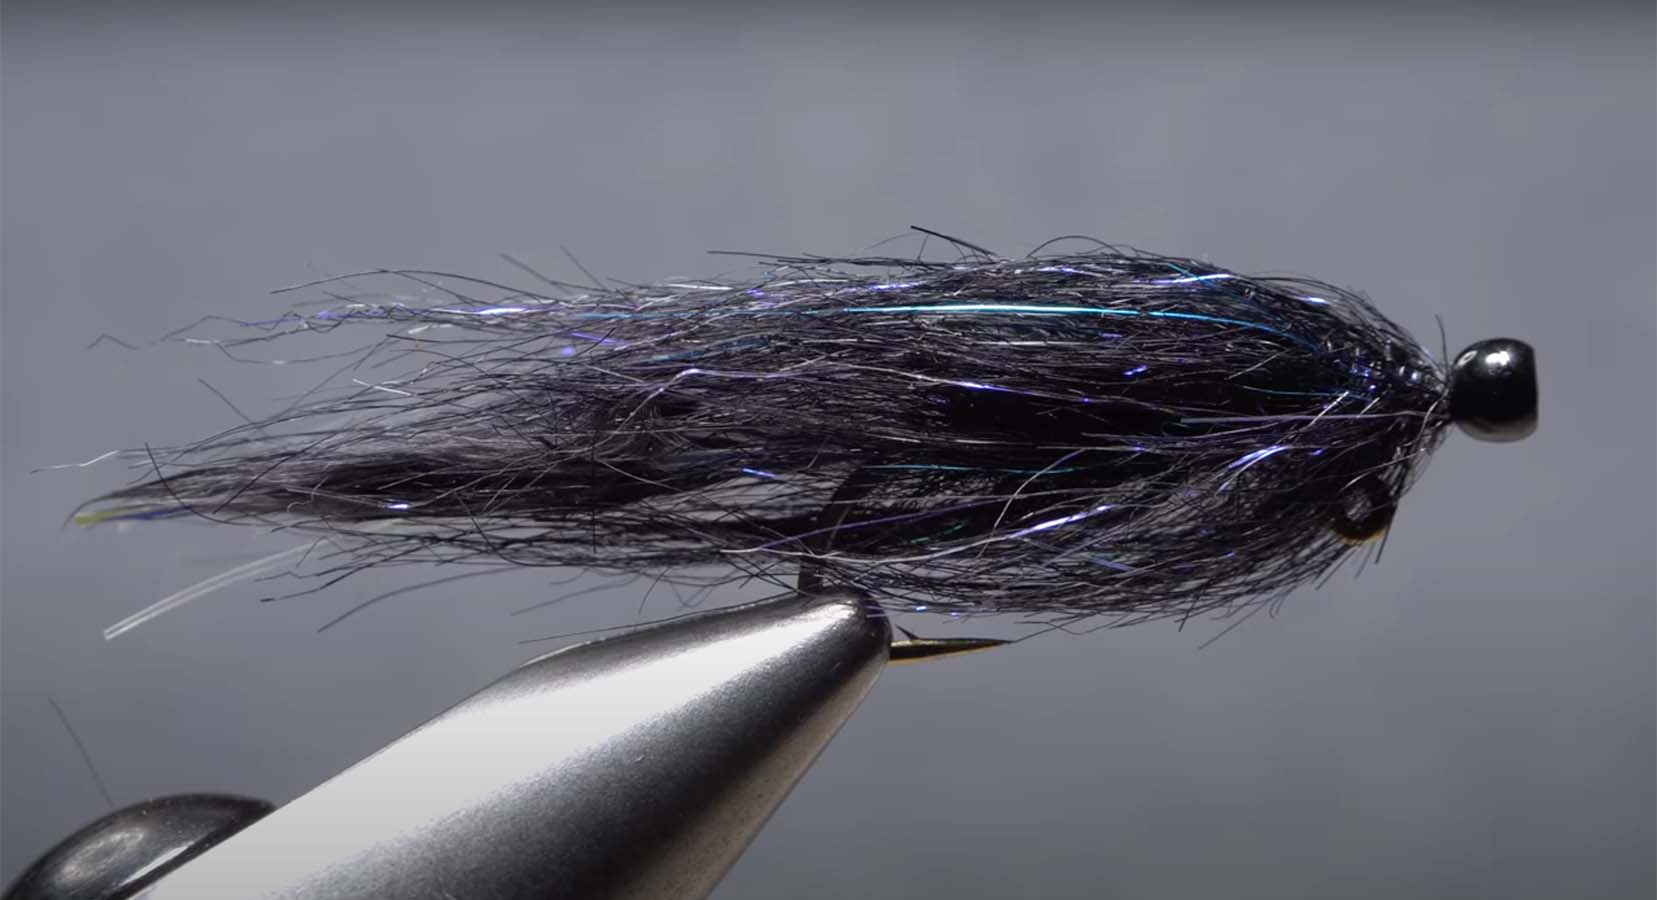 The Balanced Leech is a must have Stillwater fly and comes in many